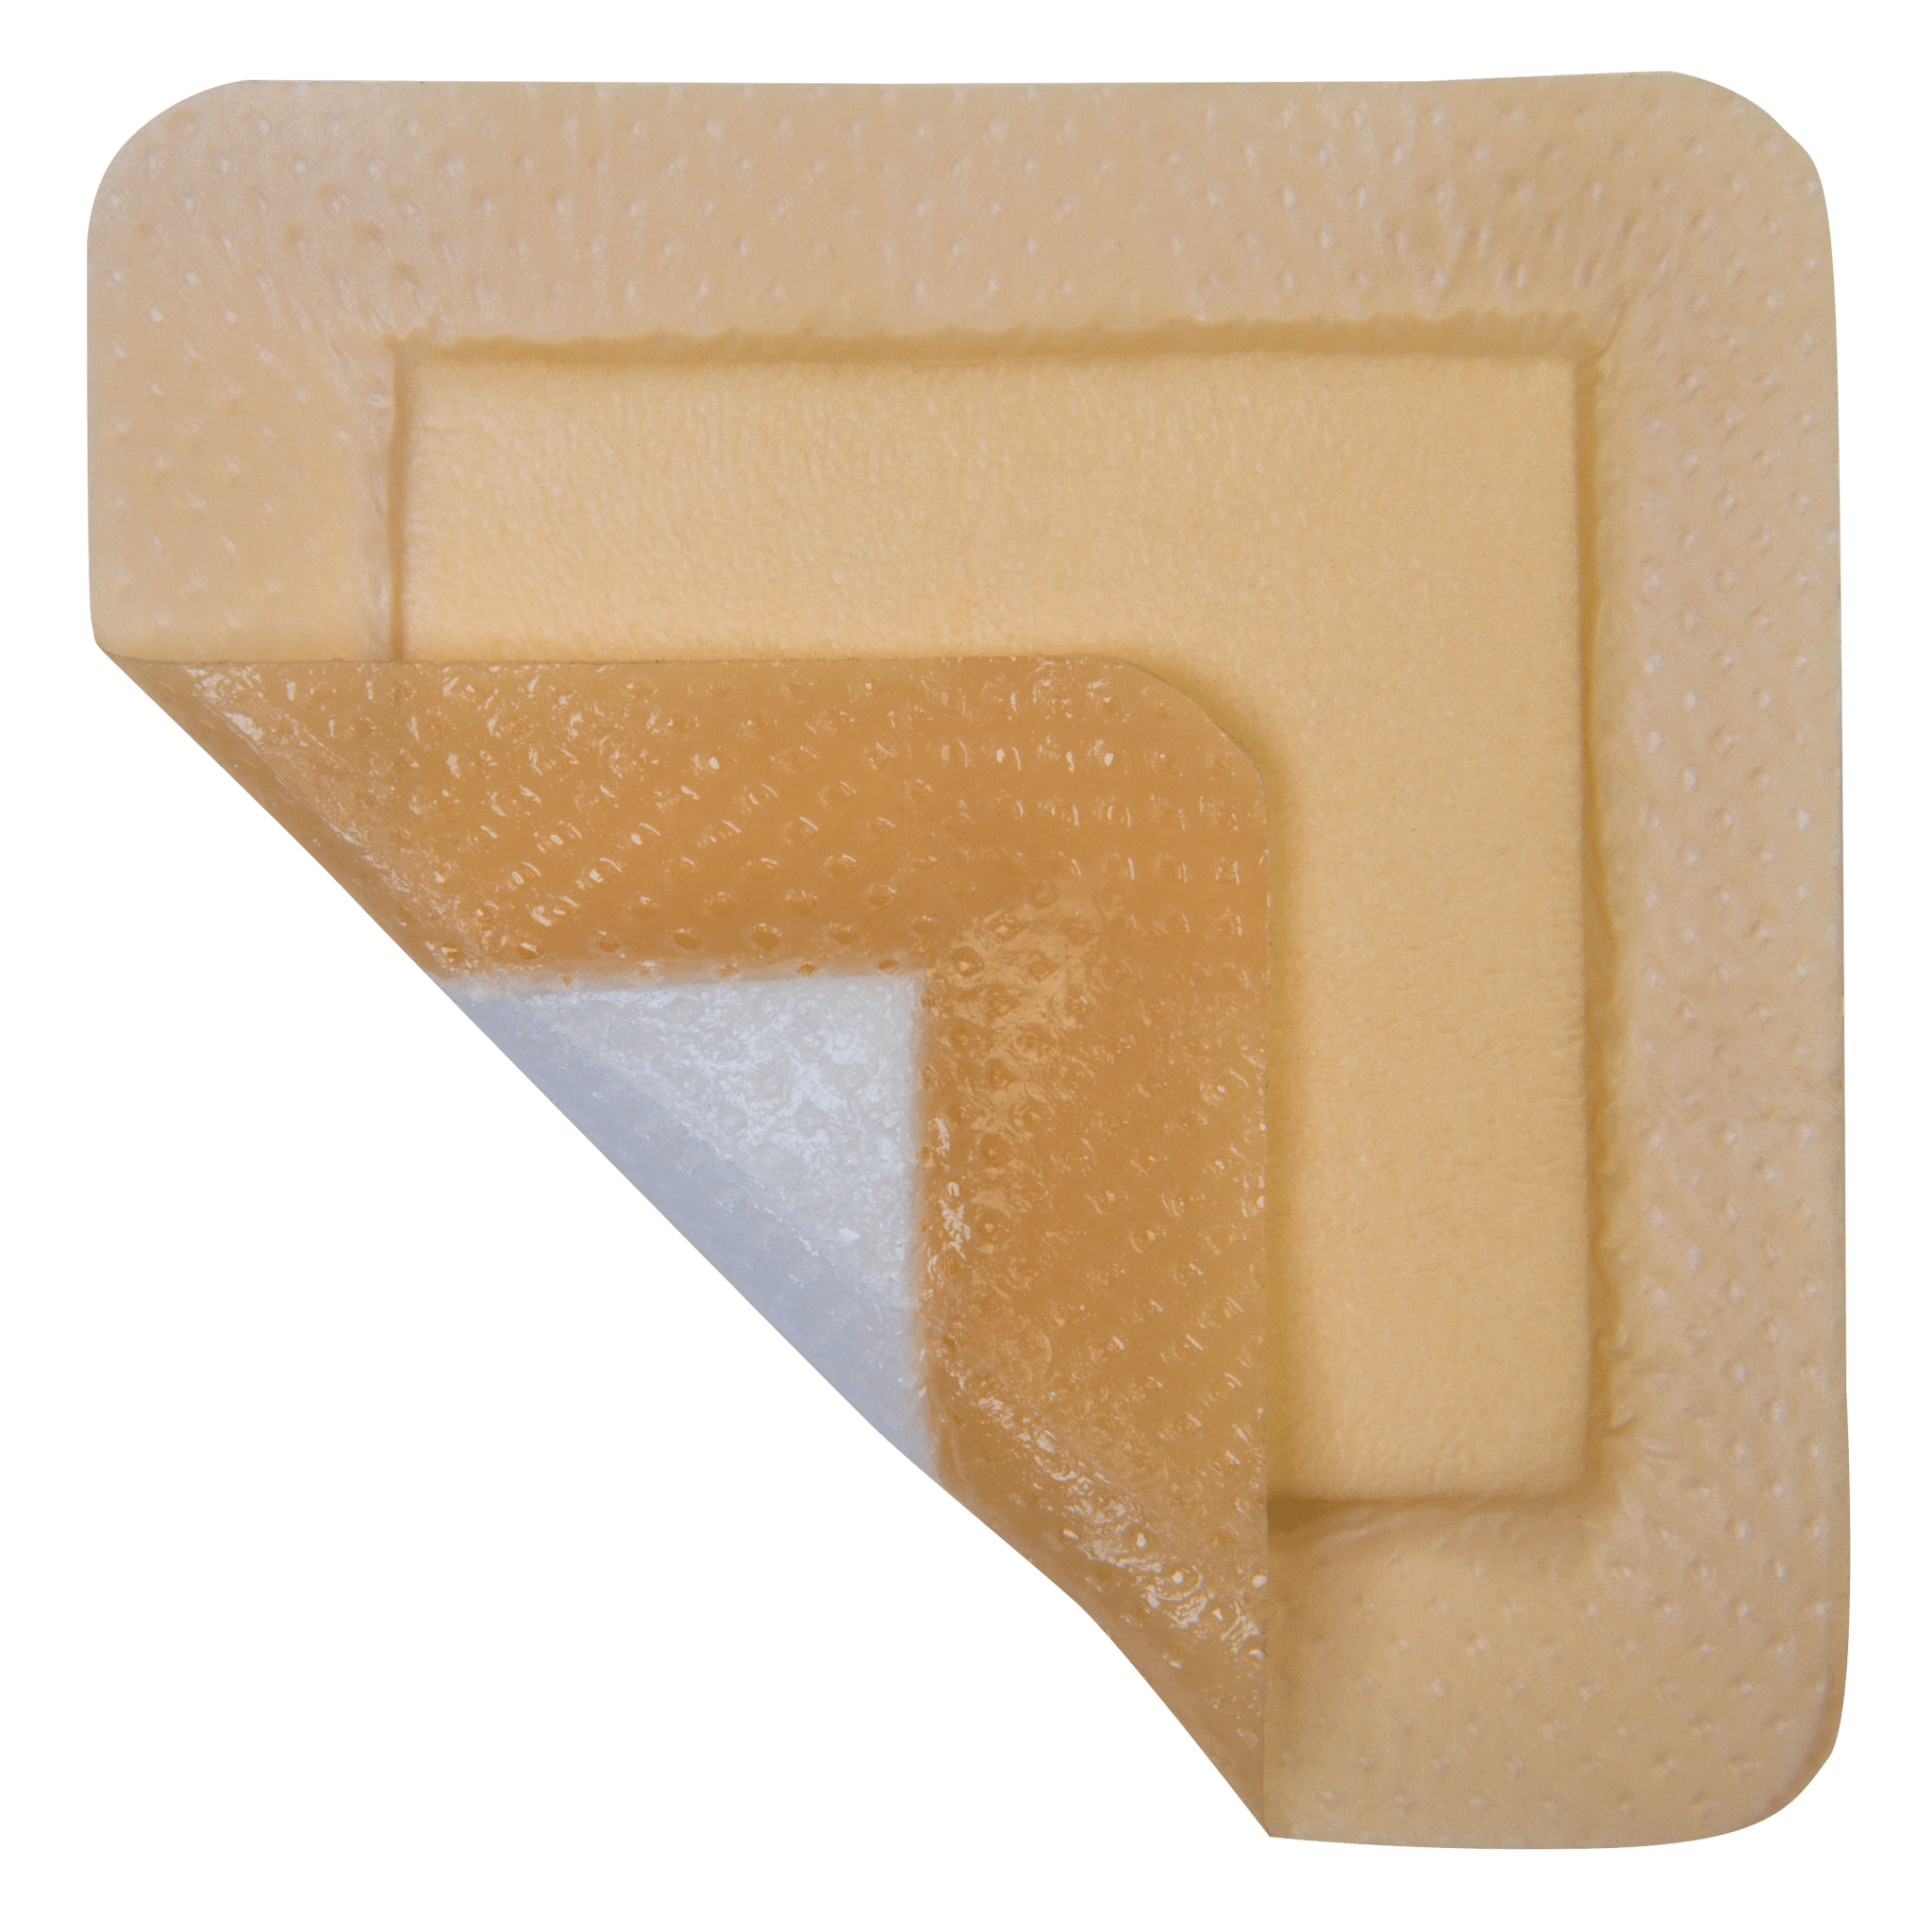 BX/5 - MediPlus Silicone Comfort Foam Adhesive Border Sacral 7.2" x 7.2", Pad Size 5.25" x 4.5" - Best Buy Medical Supplies